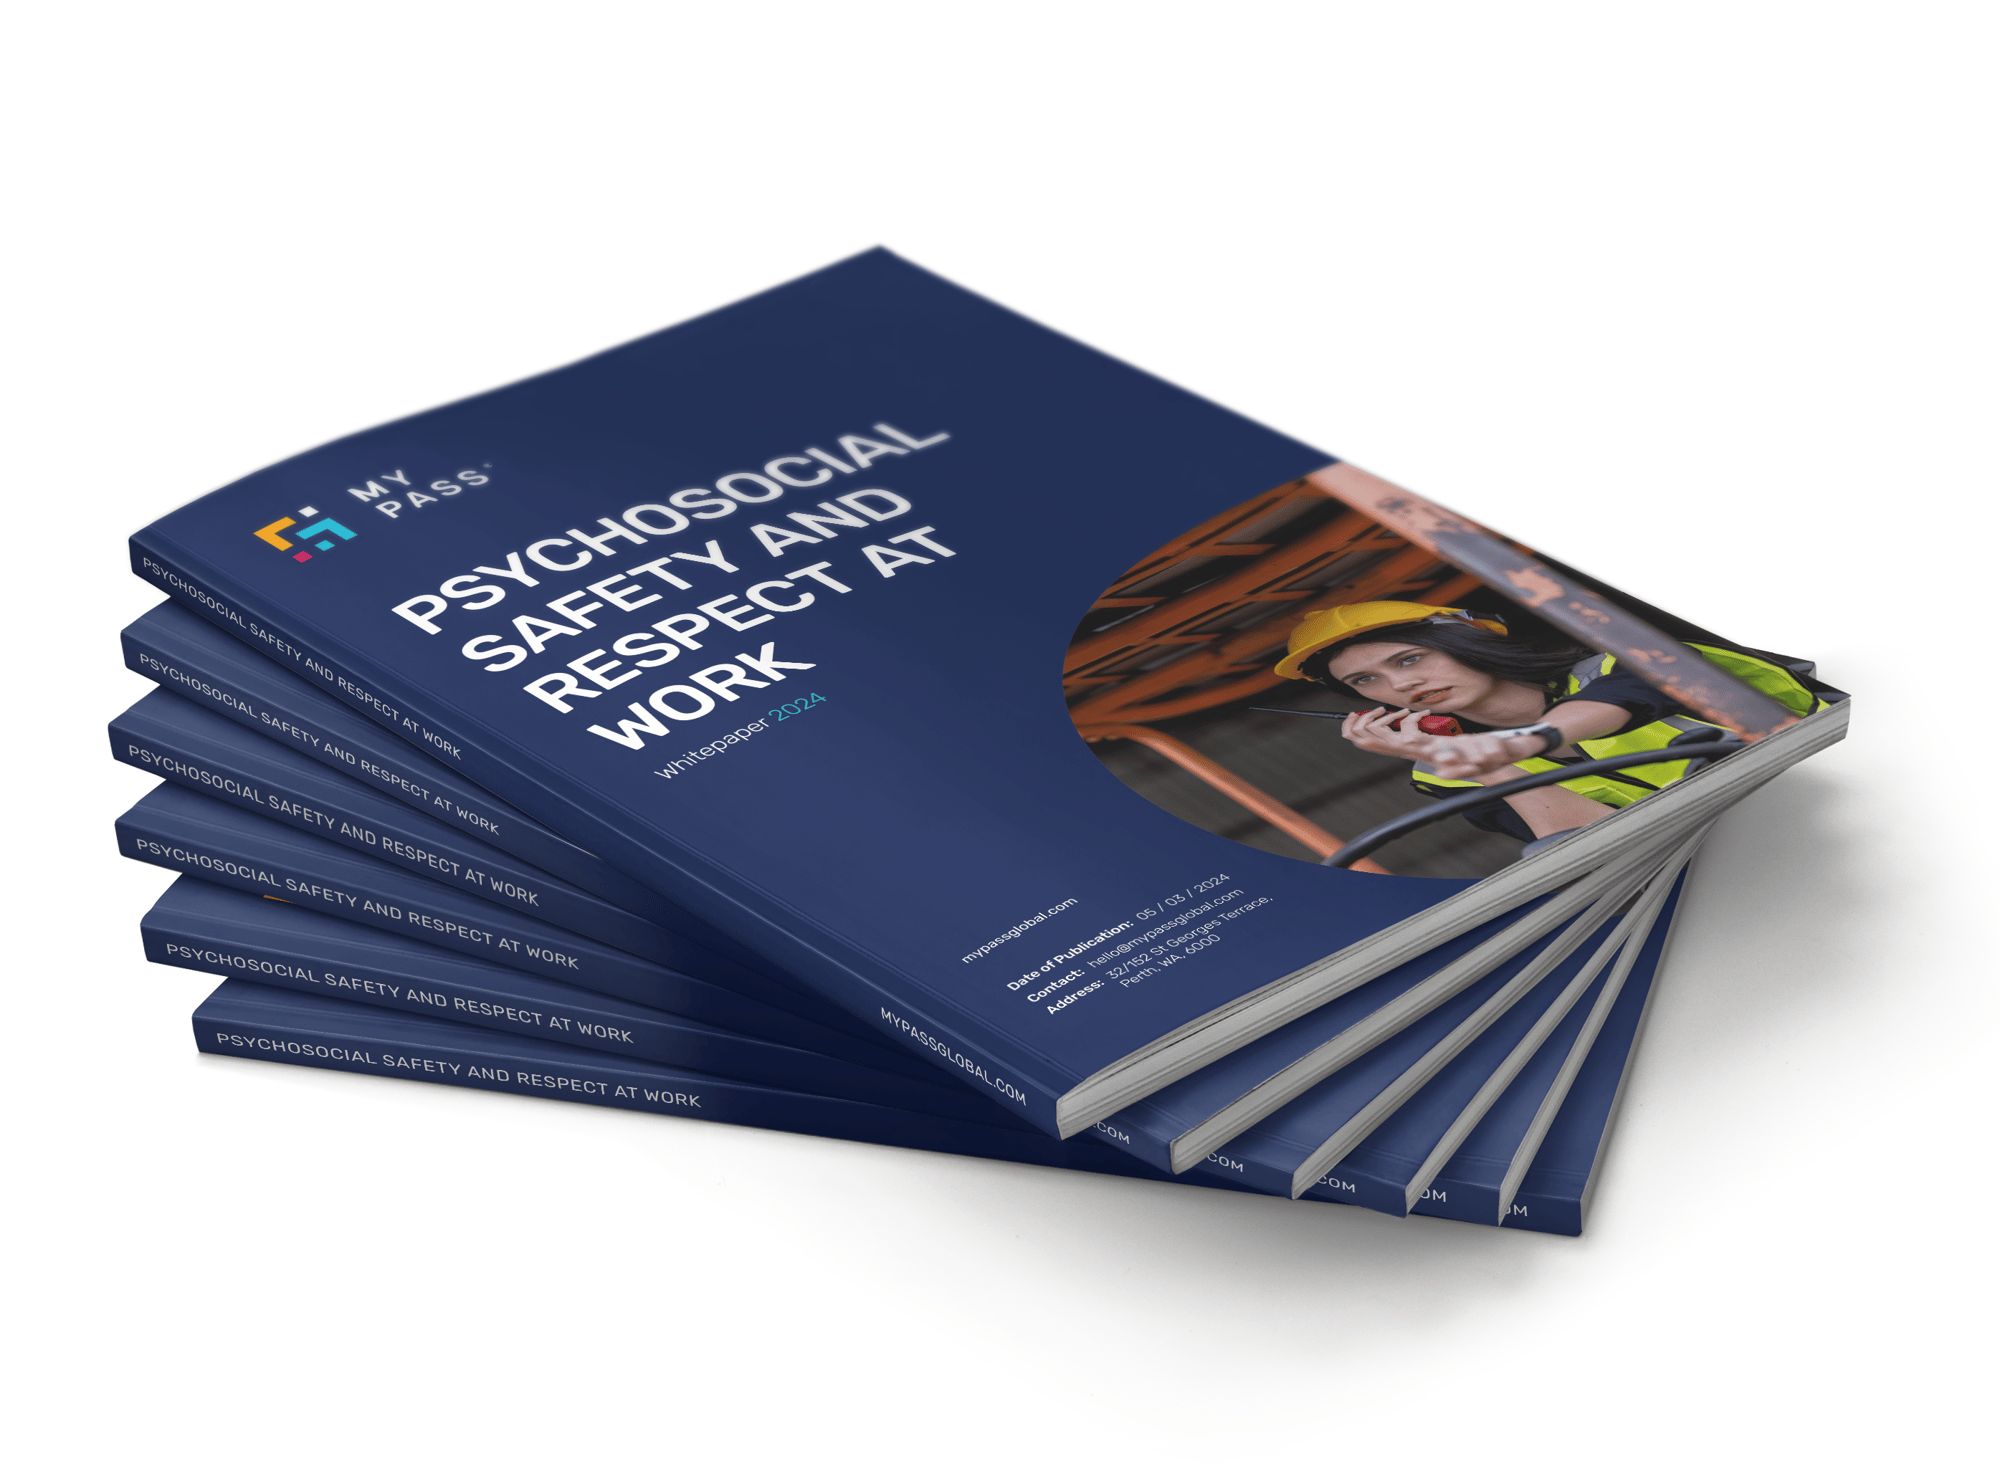 Magazine Stack – MyPass Psychosocial safety and respect at work Whitepaper